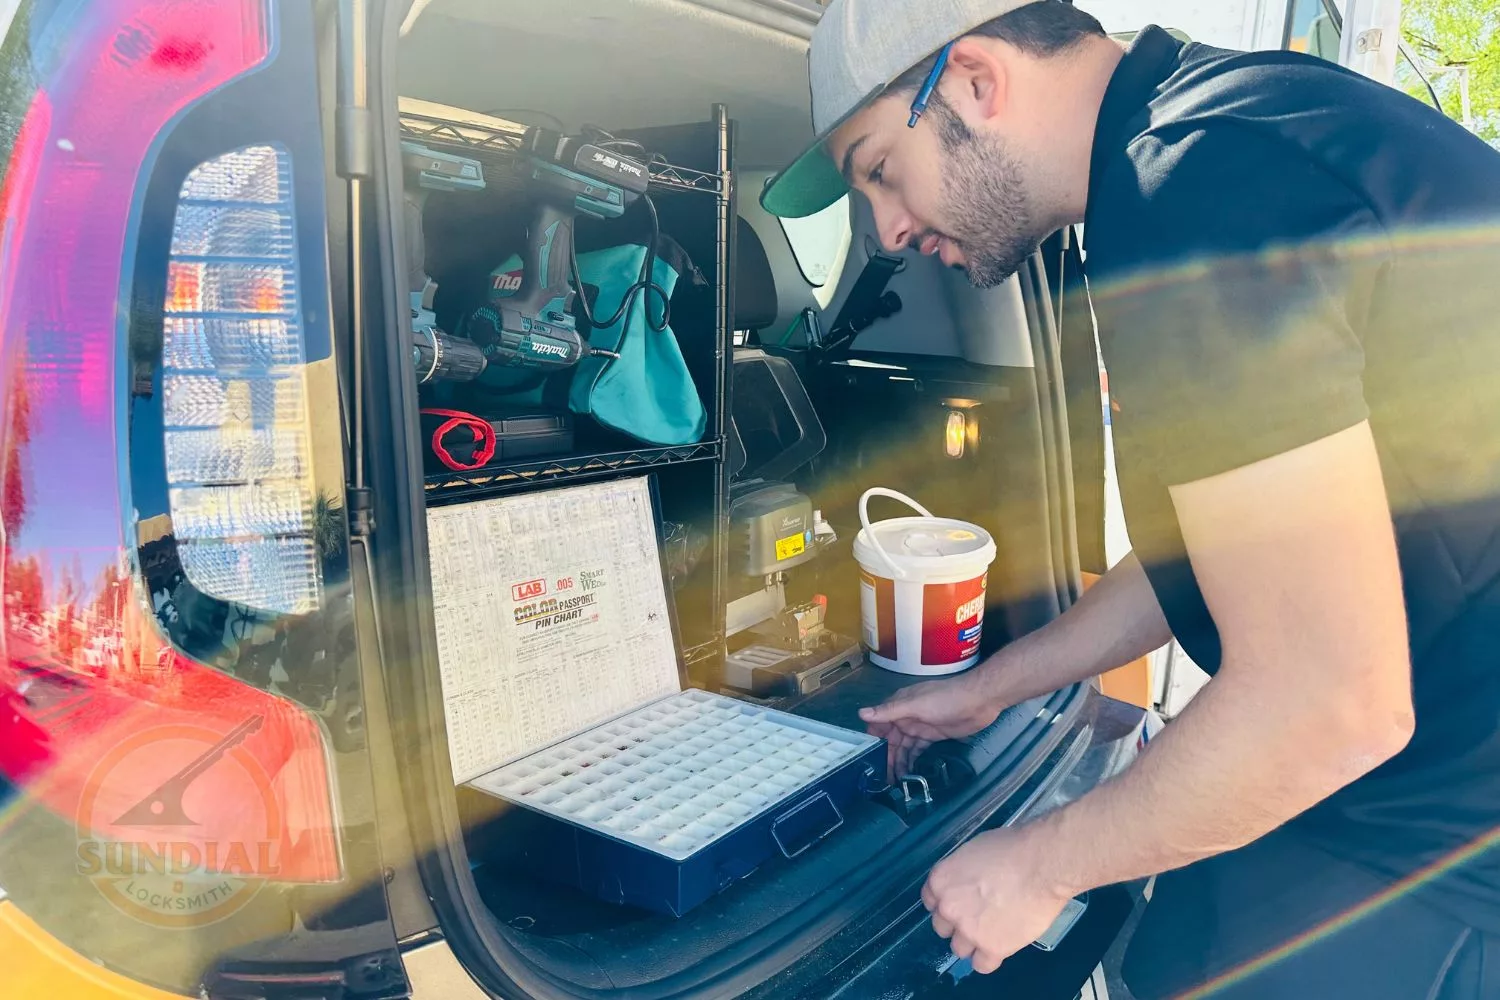 Our tech at Sundial Locksmith working inside a van with tools and equipment.